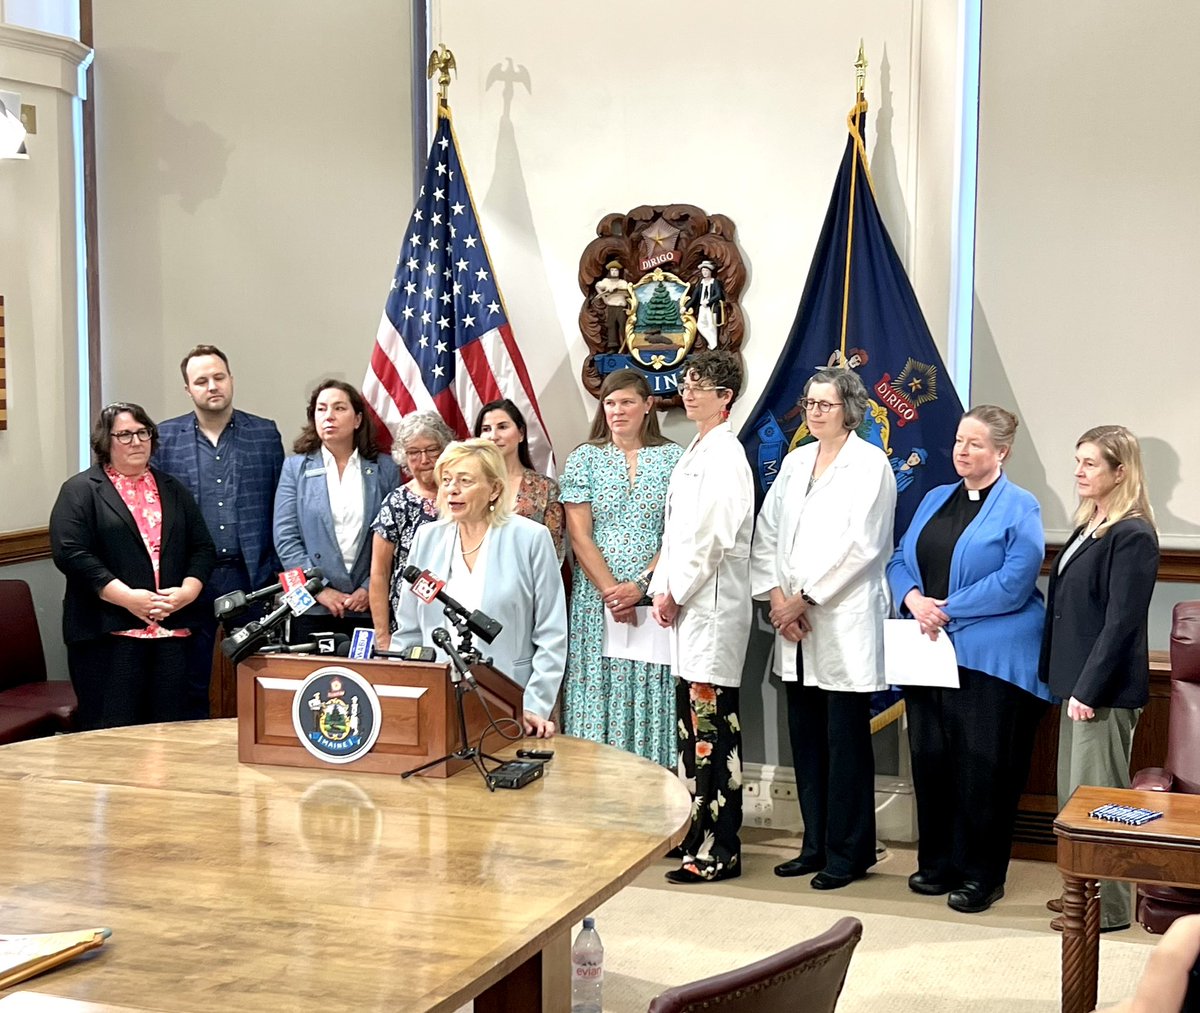 NEW LAW: @GovJanetMills just signed #LD1619, allowing decisions about abortion care to stay between patients and providers – not politicians or the government.

The government should never have the authority to force a person to remain pregnant against their will. #MEPolitics